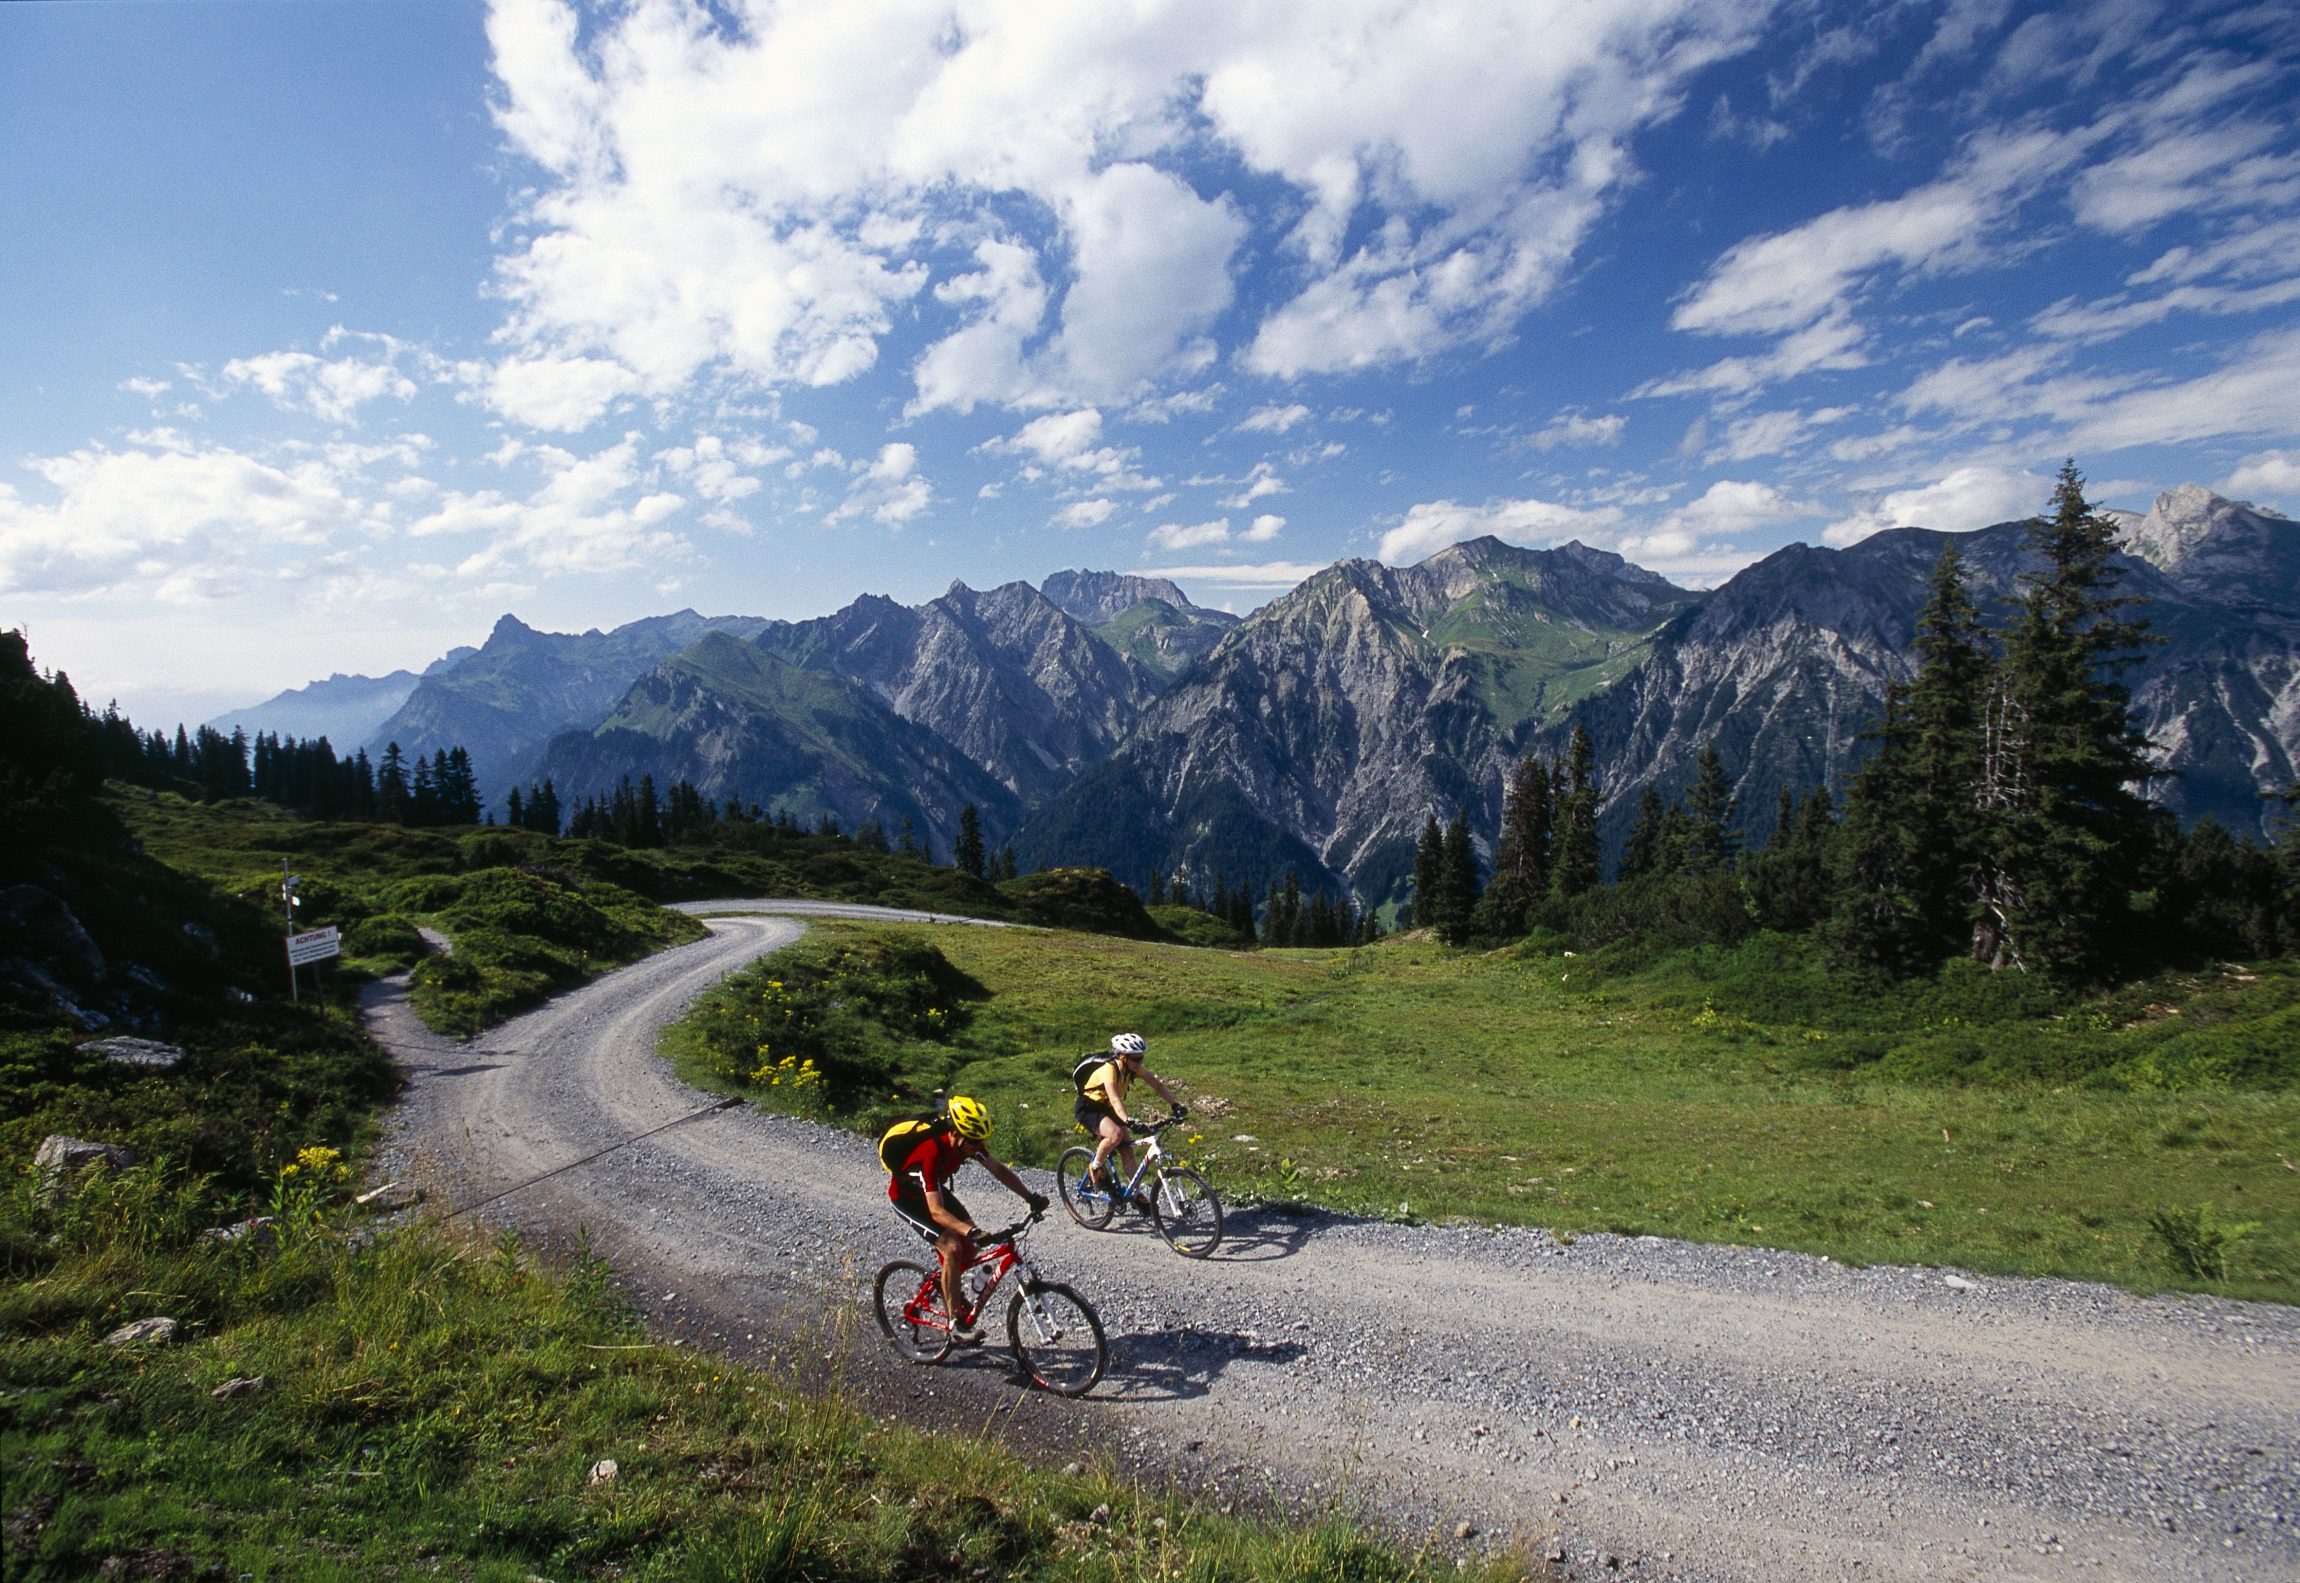 Bikers will find trails of all levels around St. Anton am Arlberg Photo credit: Wolfgang Ehn